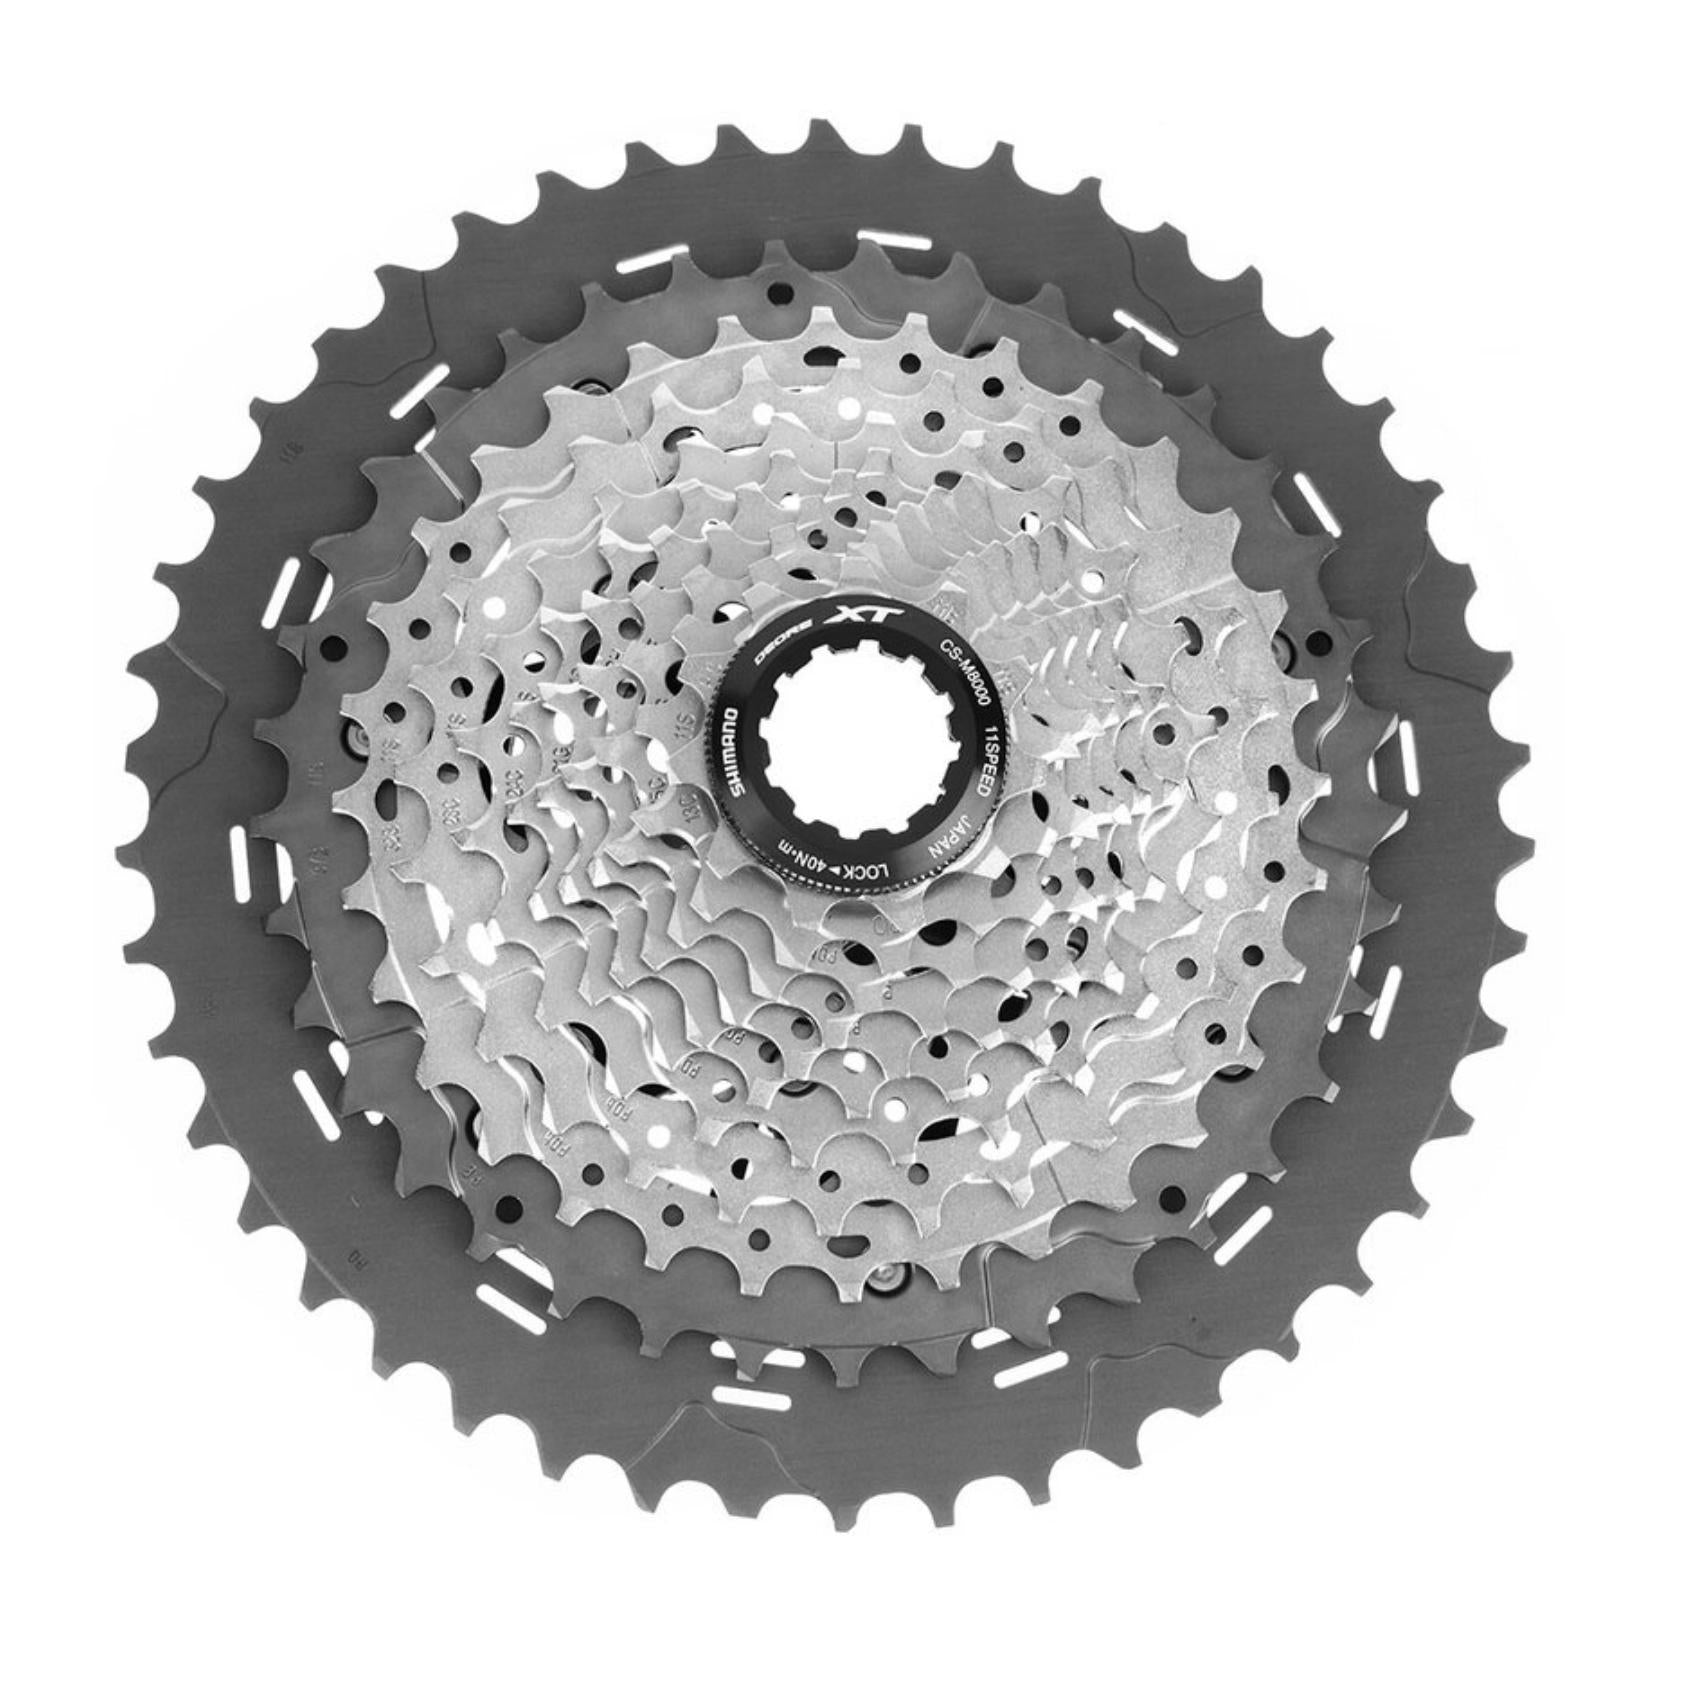 Shimano XT CS-M8000 11 Speed Cassette - Parts - Bicycle Warehouse